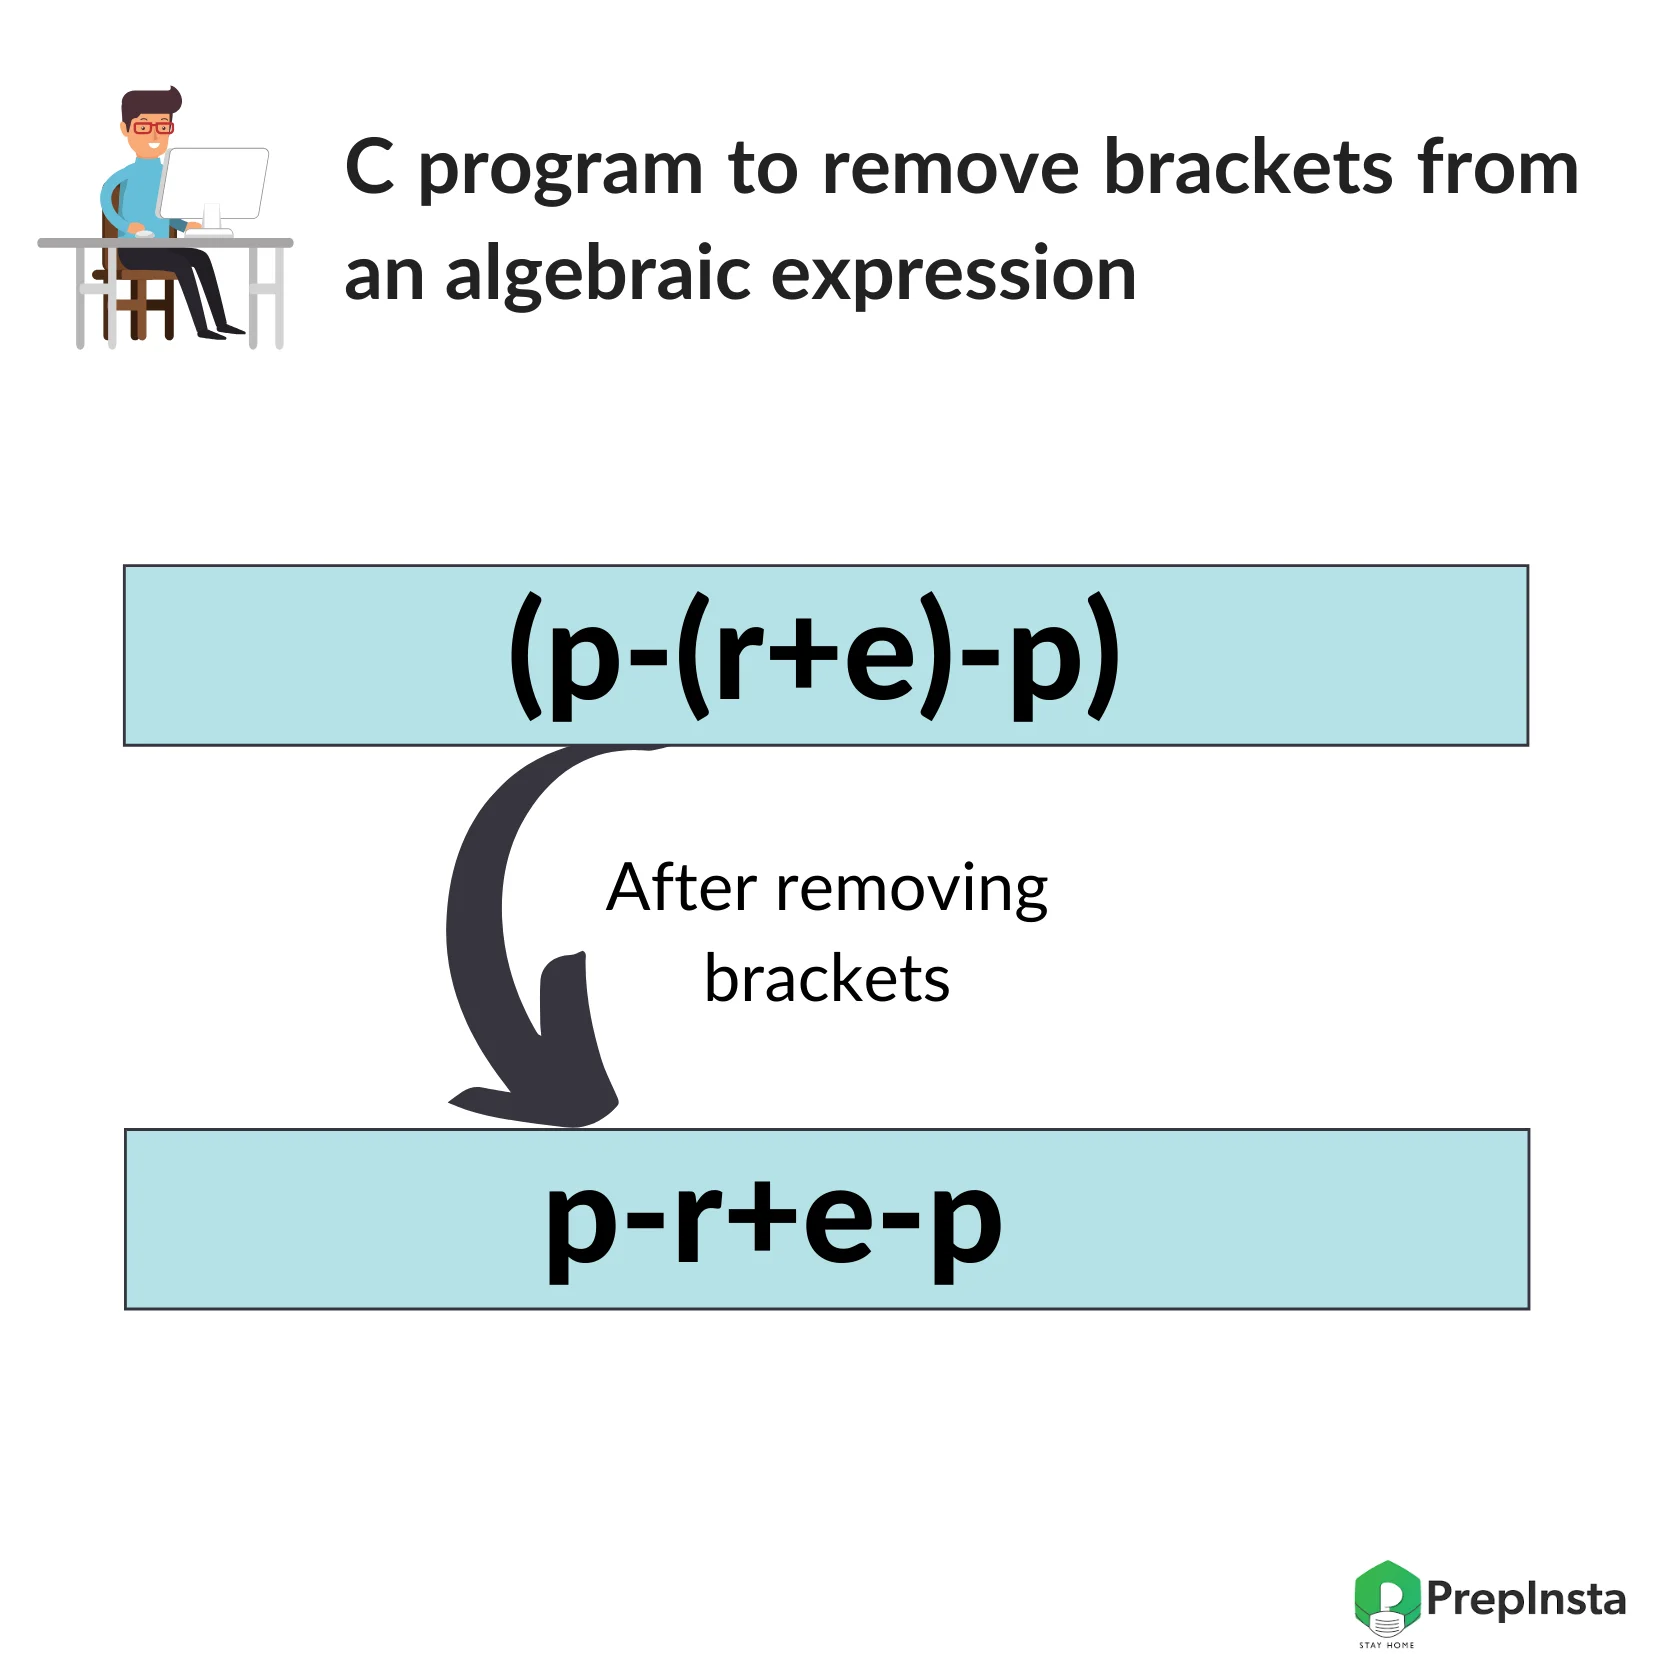 C program to remove brackets from an algebraic expression